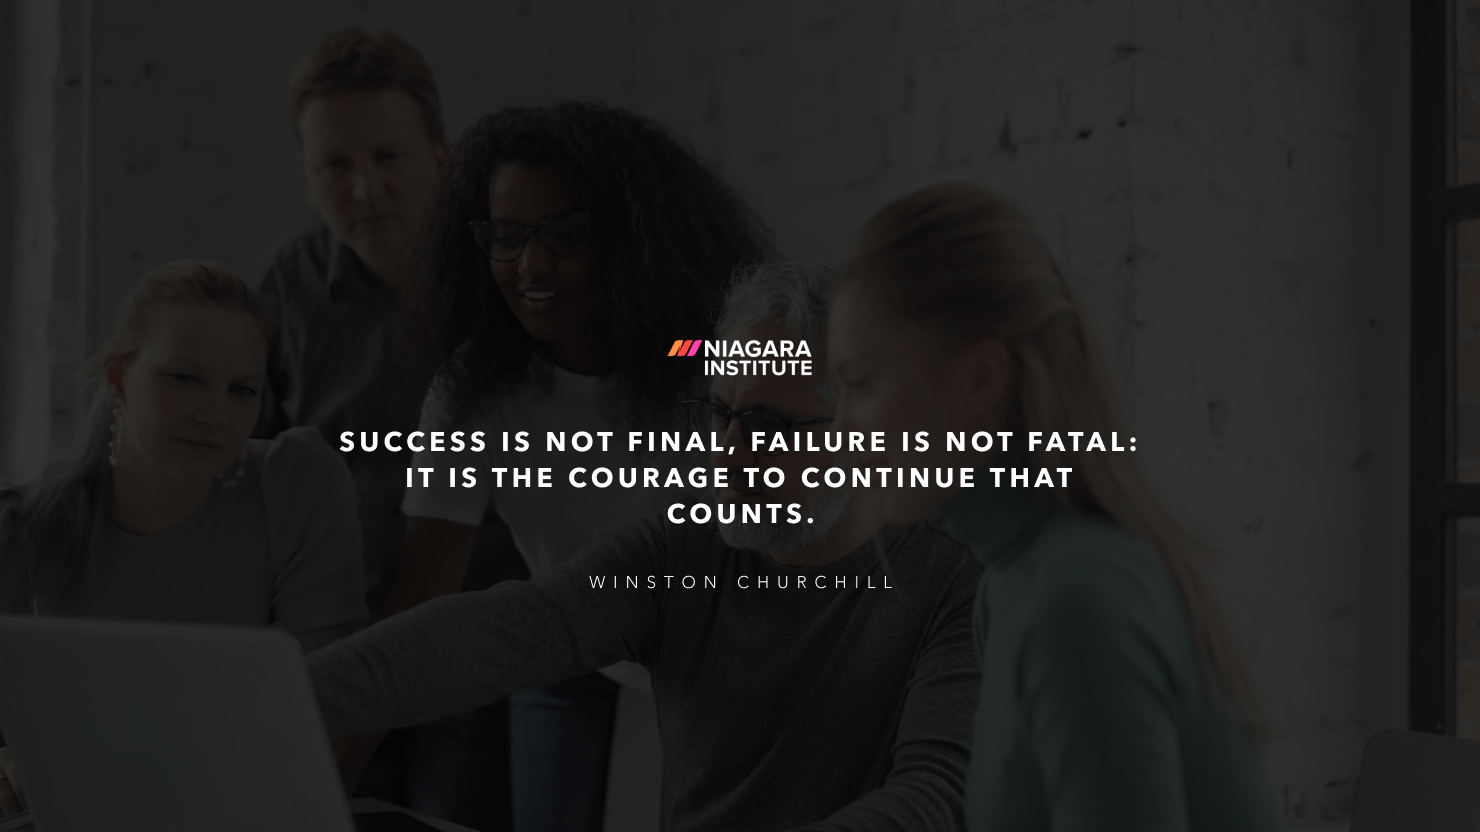 Success is not final, failure is not fatal_ It is the courage to continue that counts